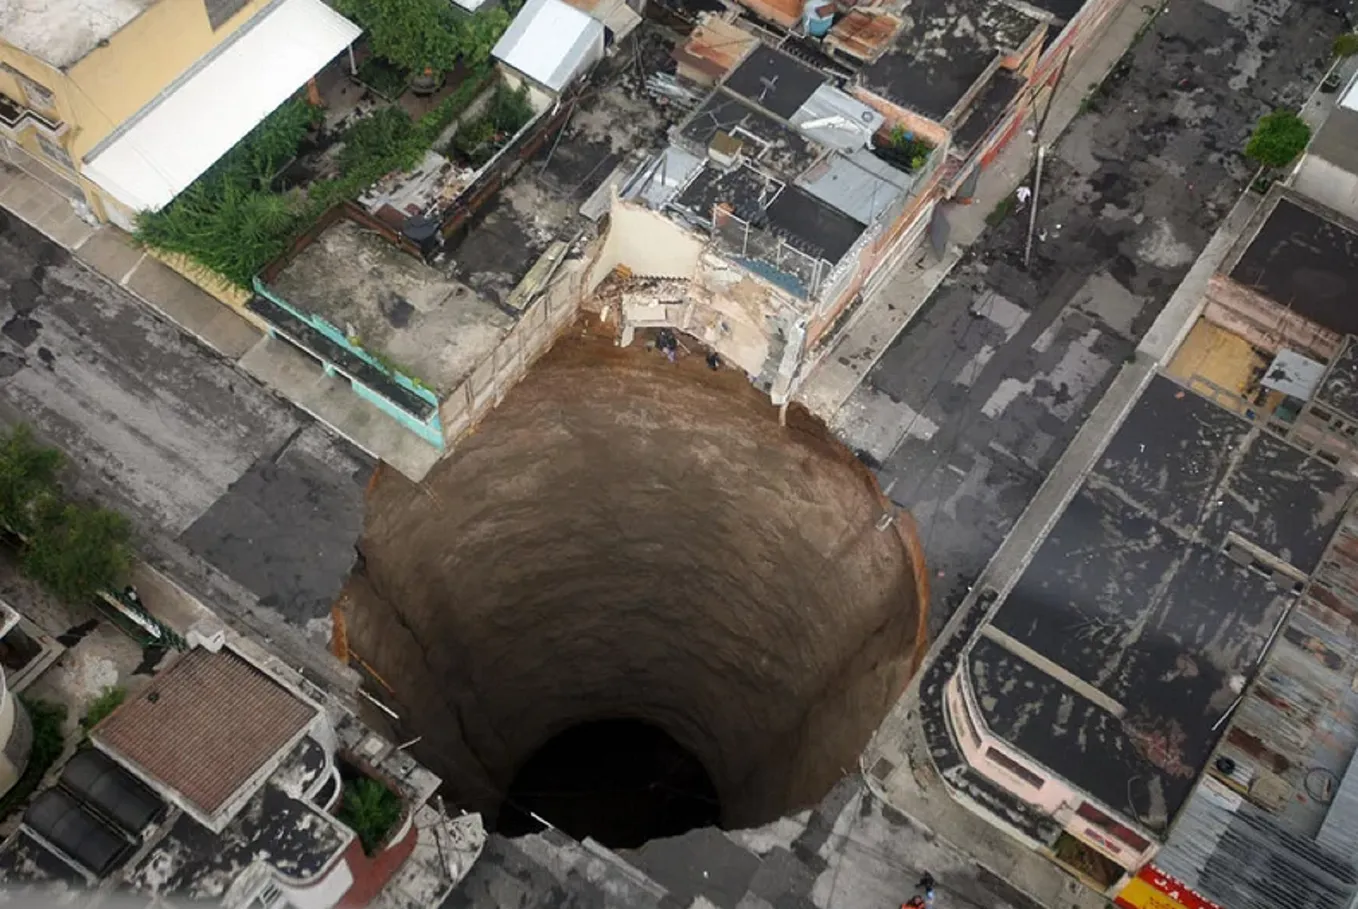 ebruary 15, 2003, A Sinkhole Occurred In The Courtyard Of A Nursery School 🕳️ Fortunately It Was The Night